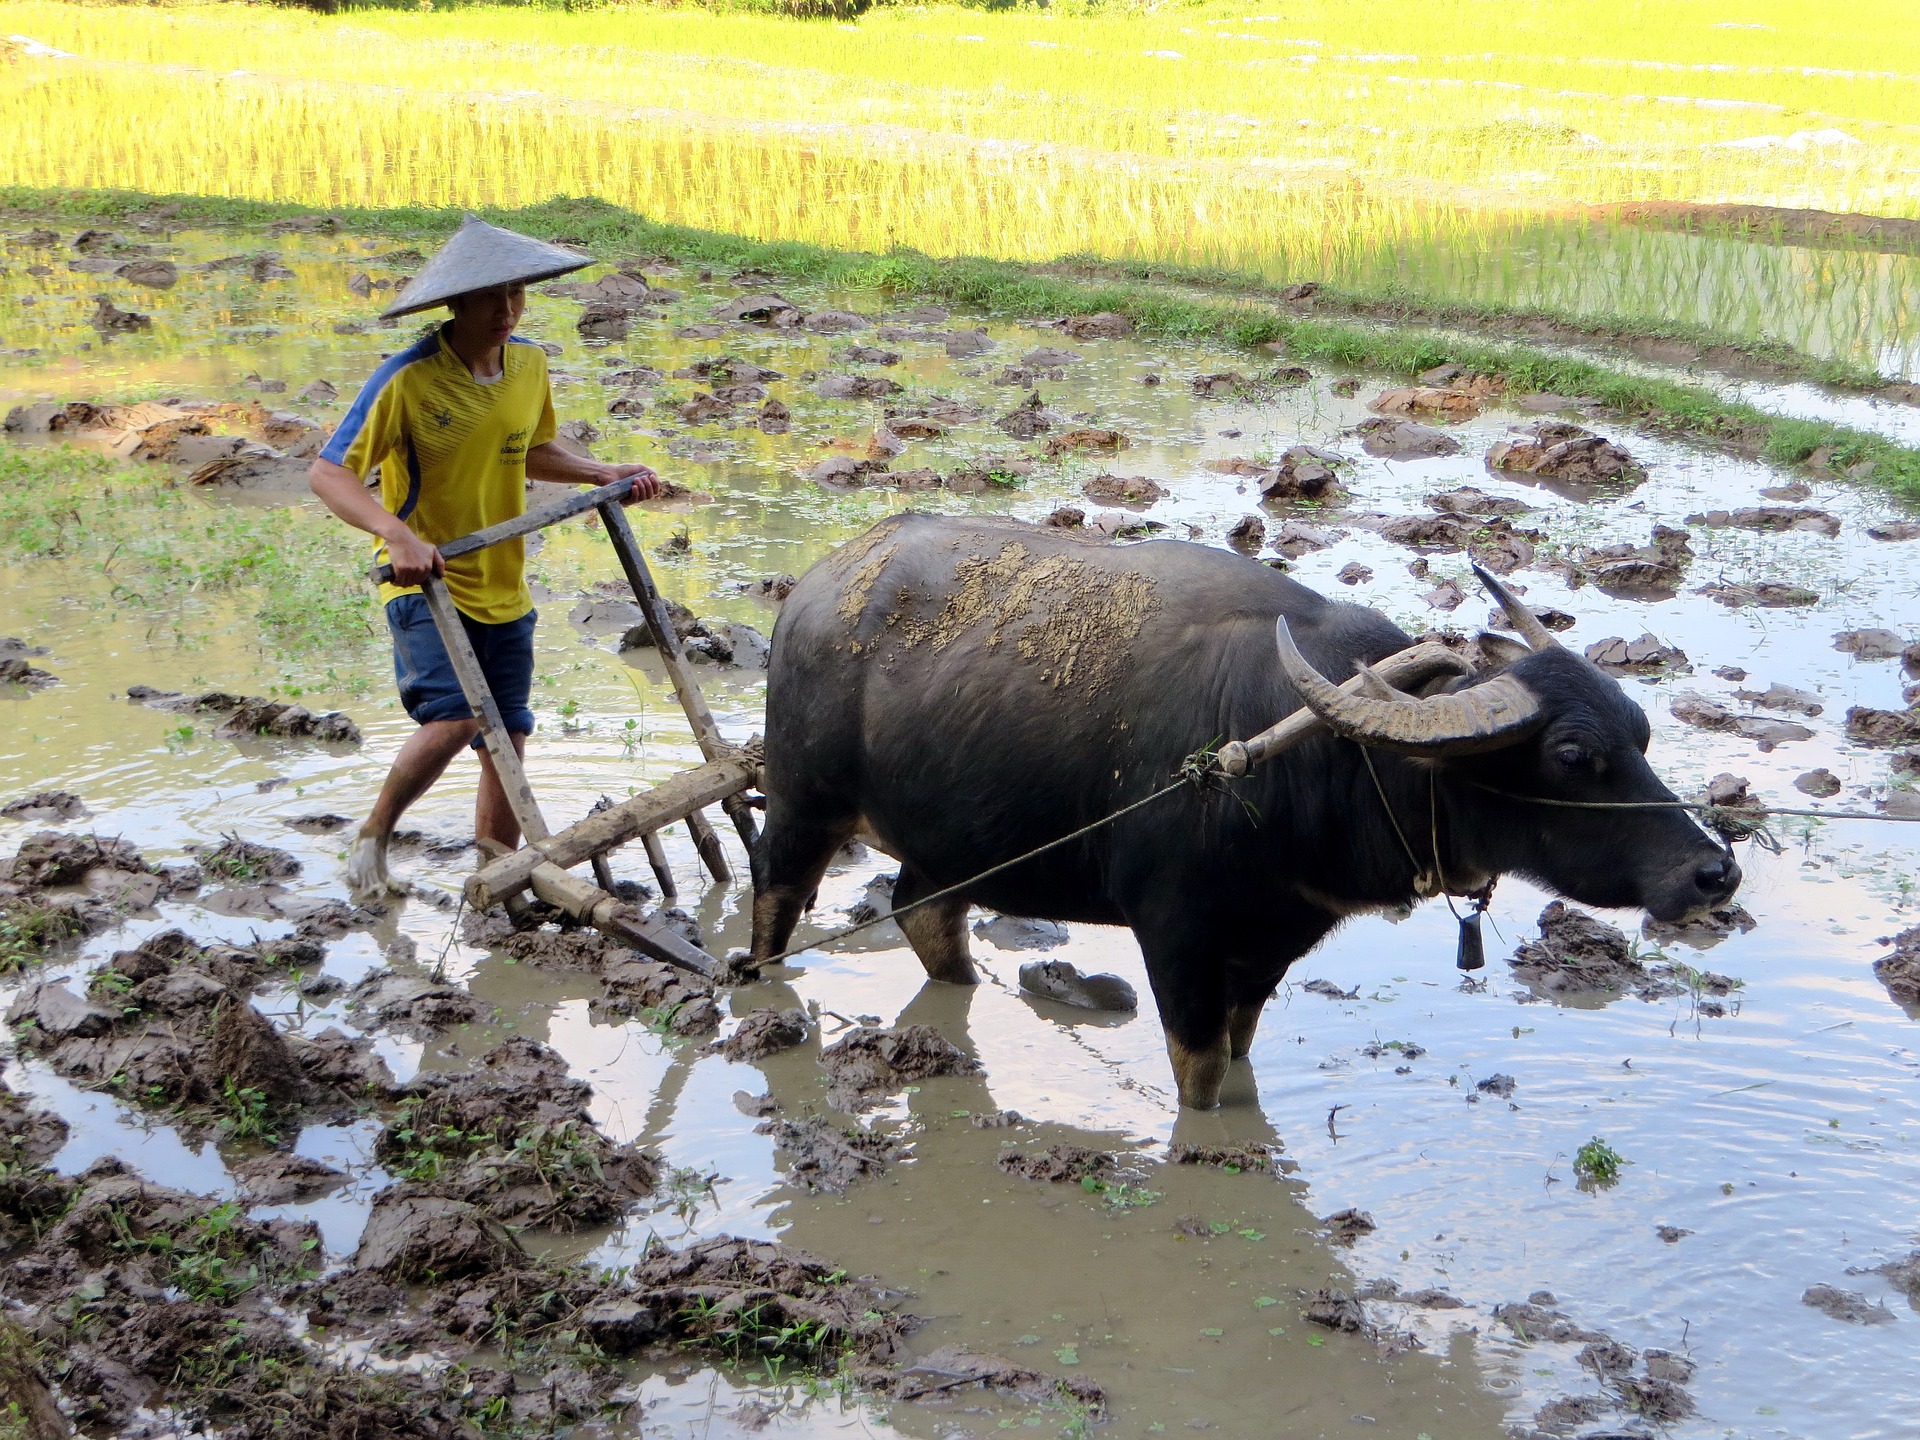 Rice cultivation in Laos